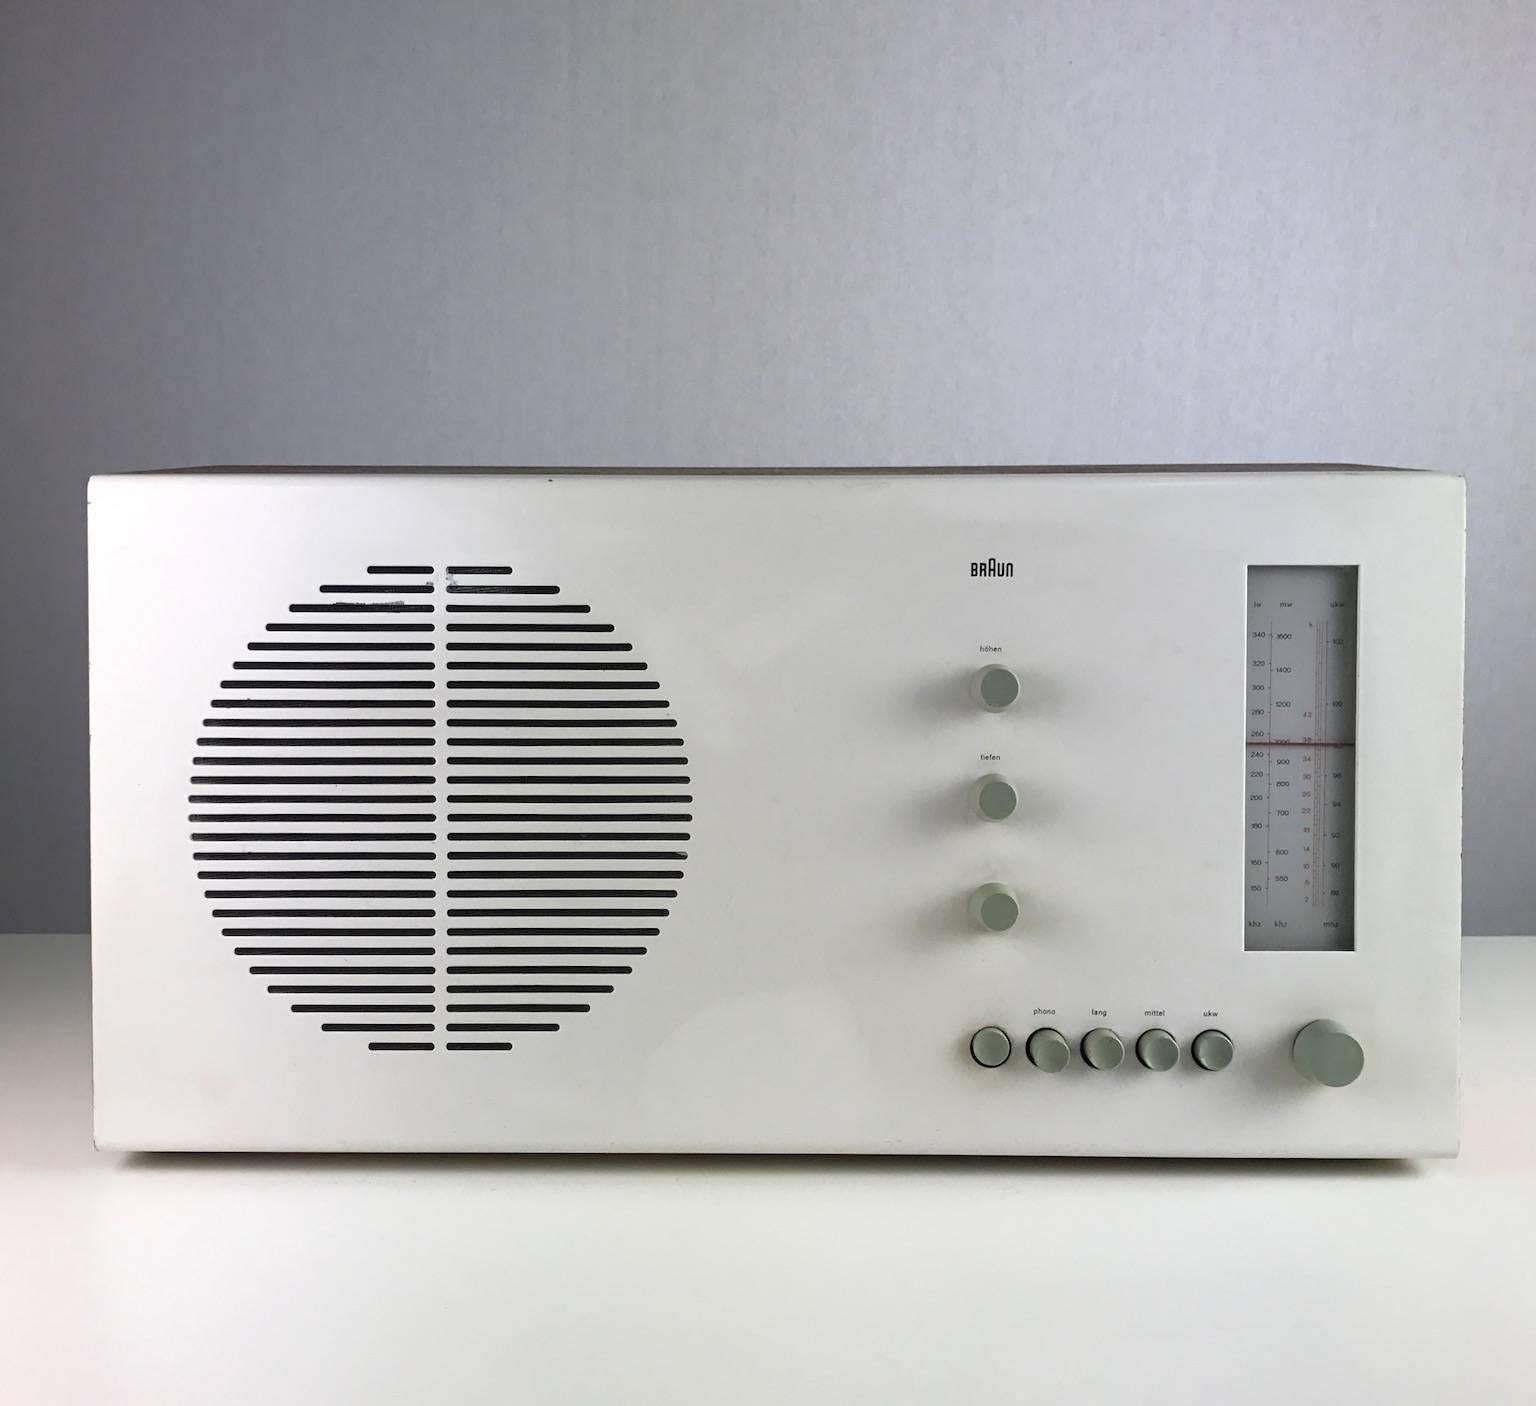 Legendary Dieter Rams design by German Braun. 

The RT20 designed in 1961 is in a very good vintage condition. 

Has been checked and serviced by proffesional radio technician. Works like when it left the factory. 

